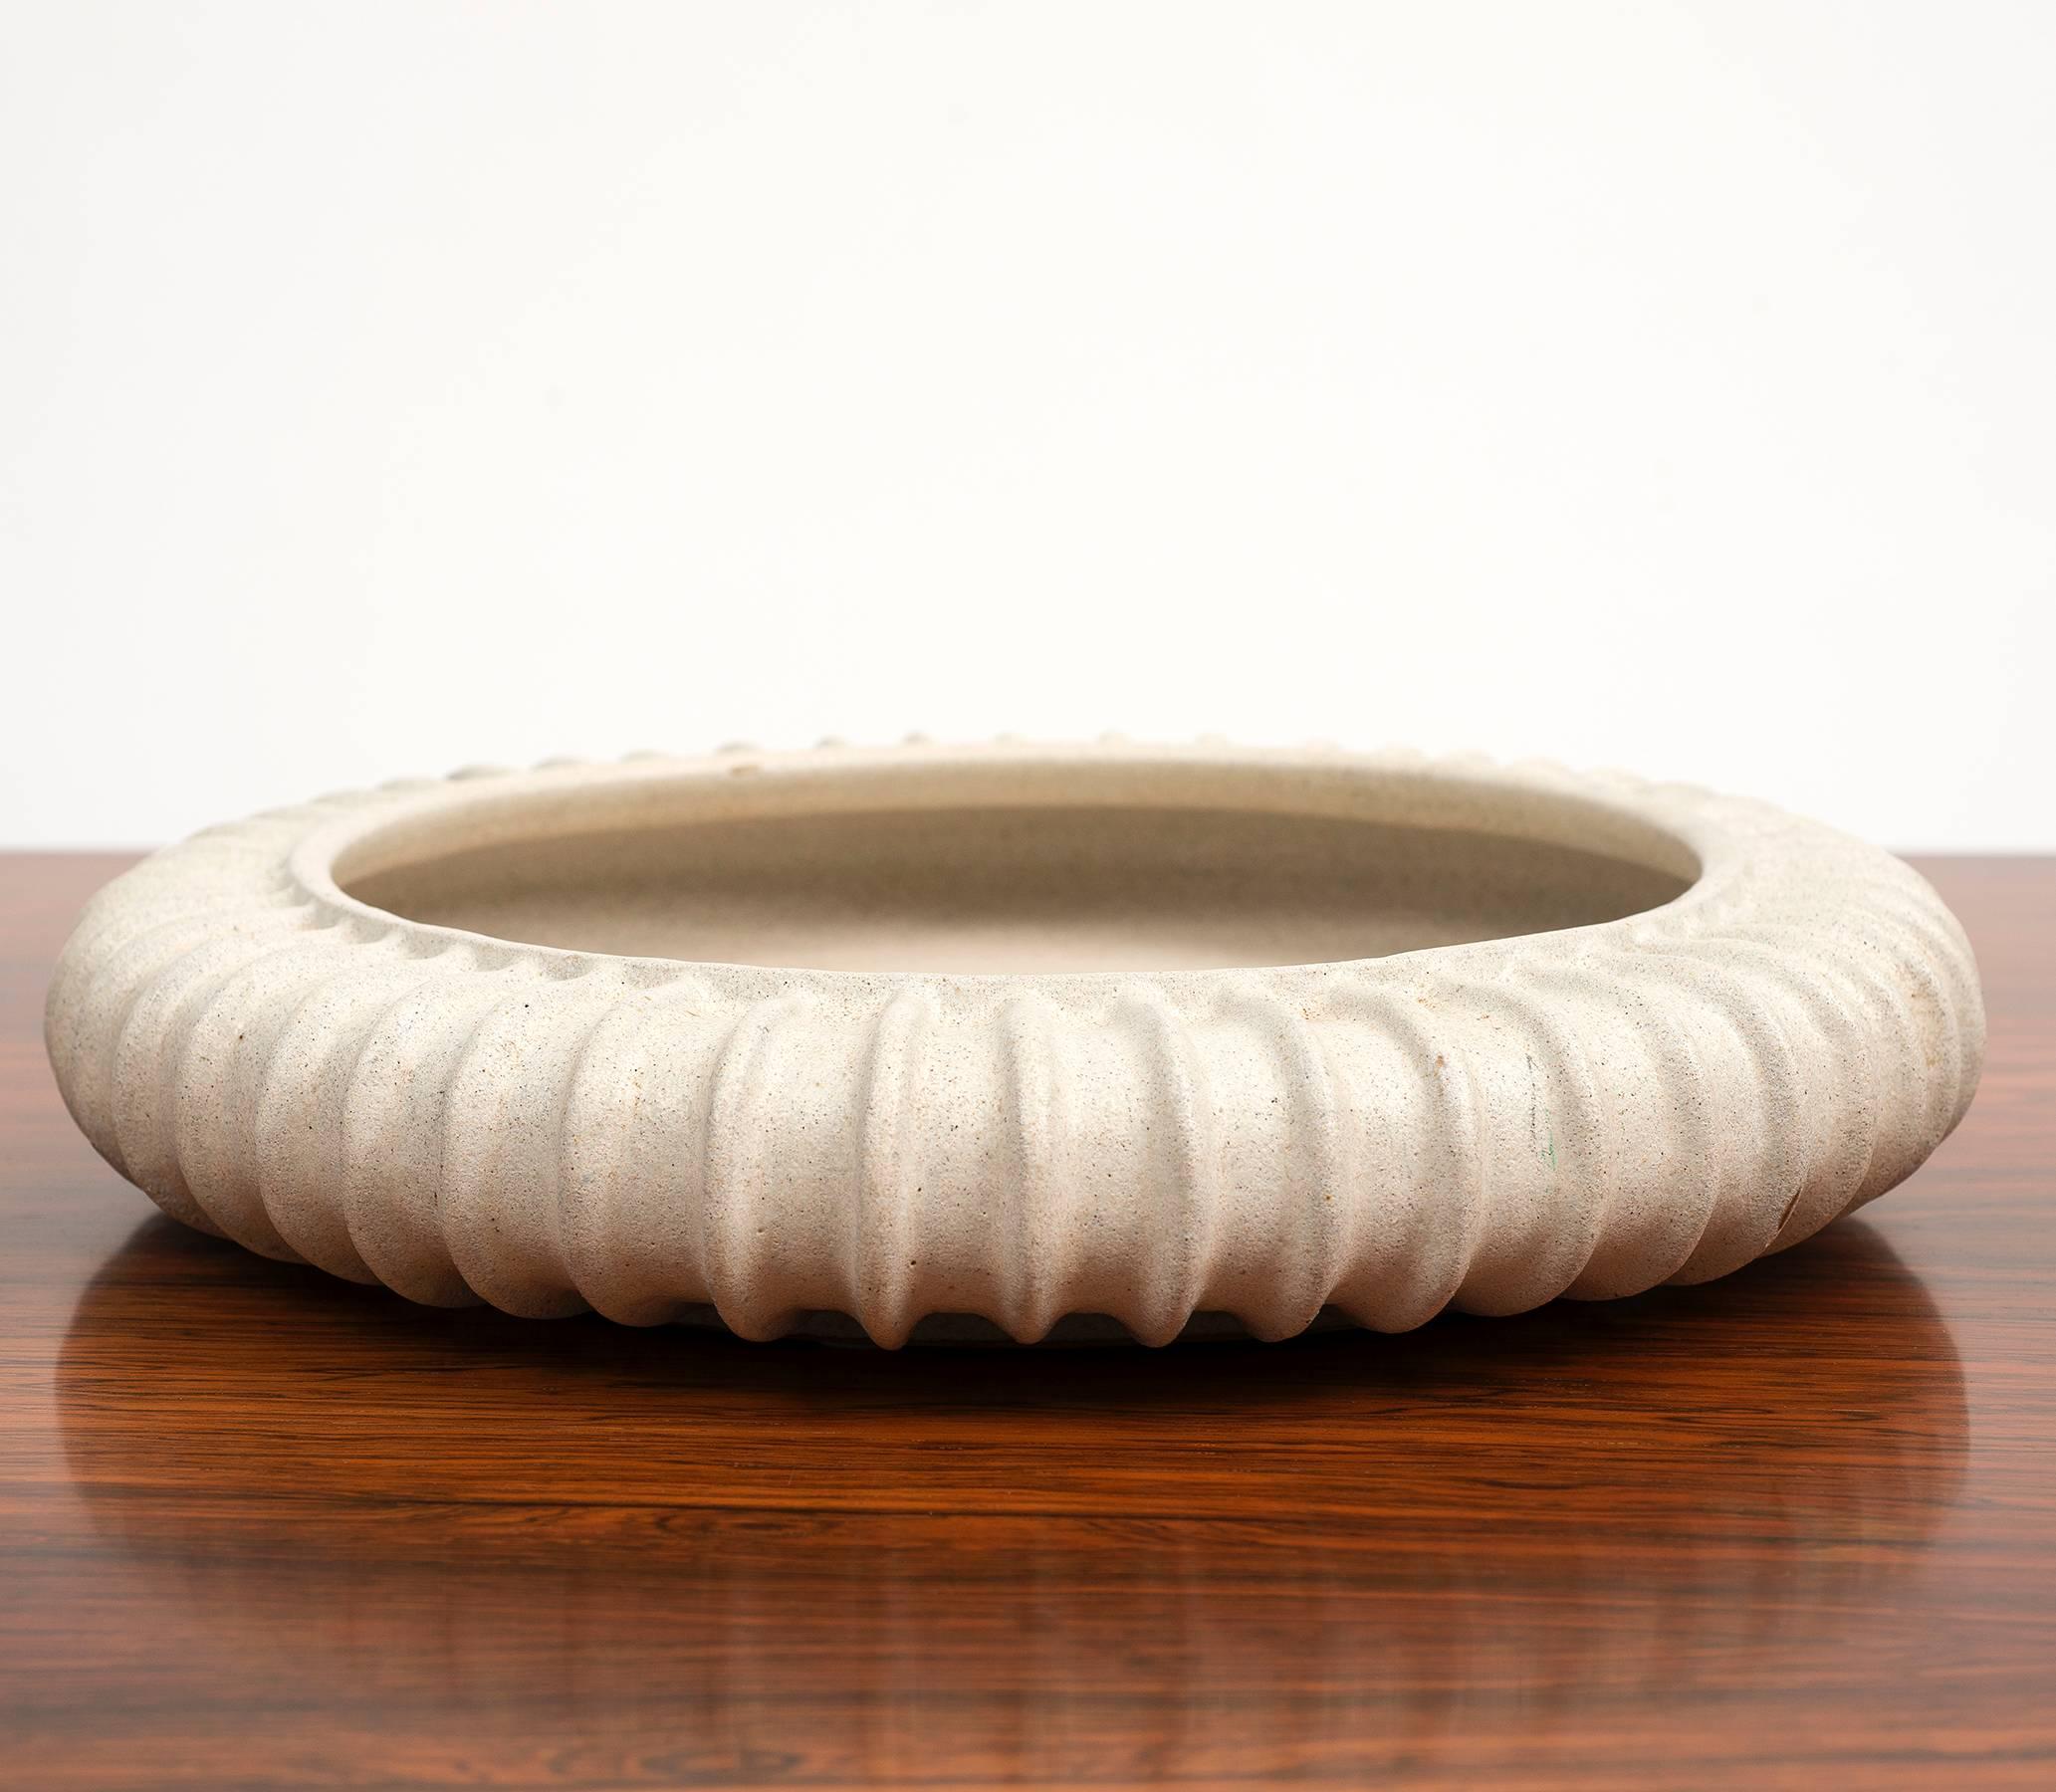 A large circular stoneware dish by Arne Bang with fluted exterior in a greyish white glaze, Denmark, 1940s.